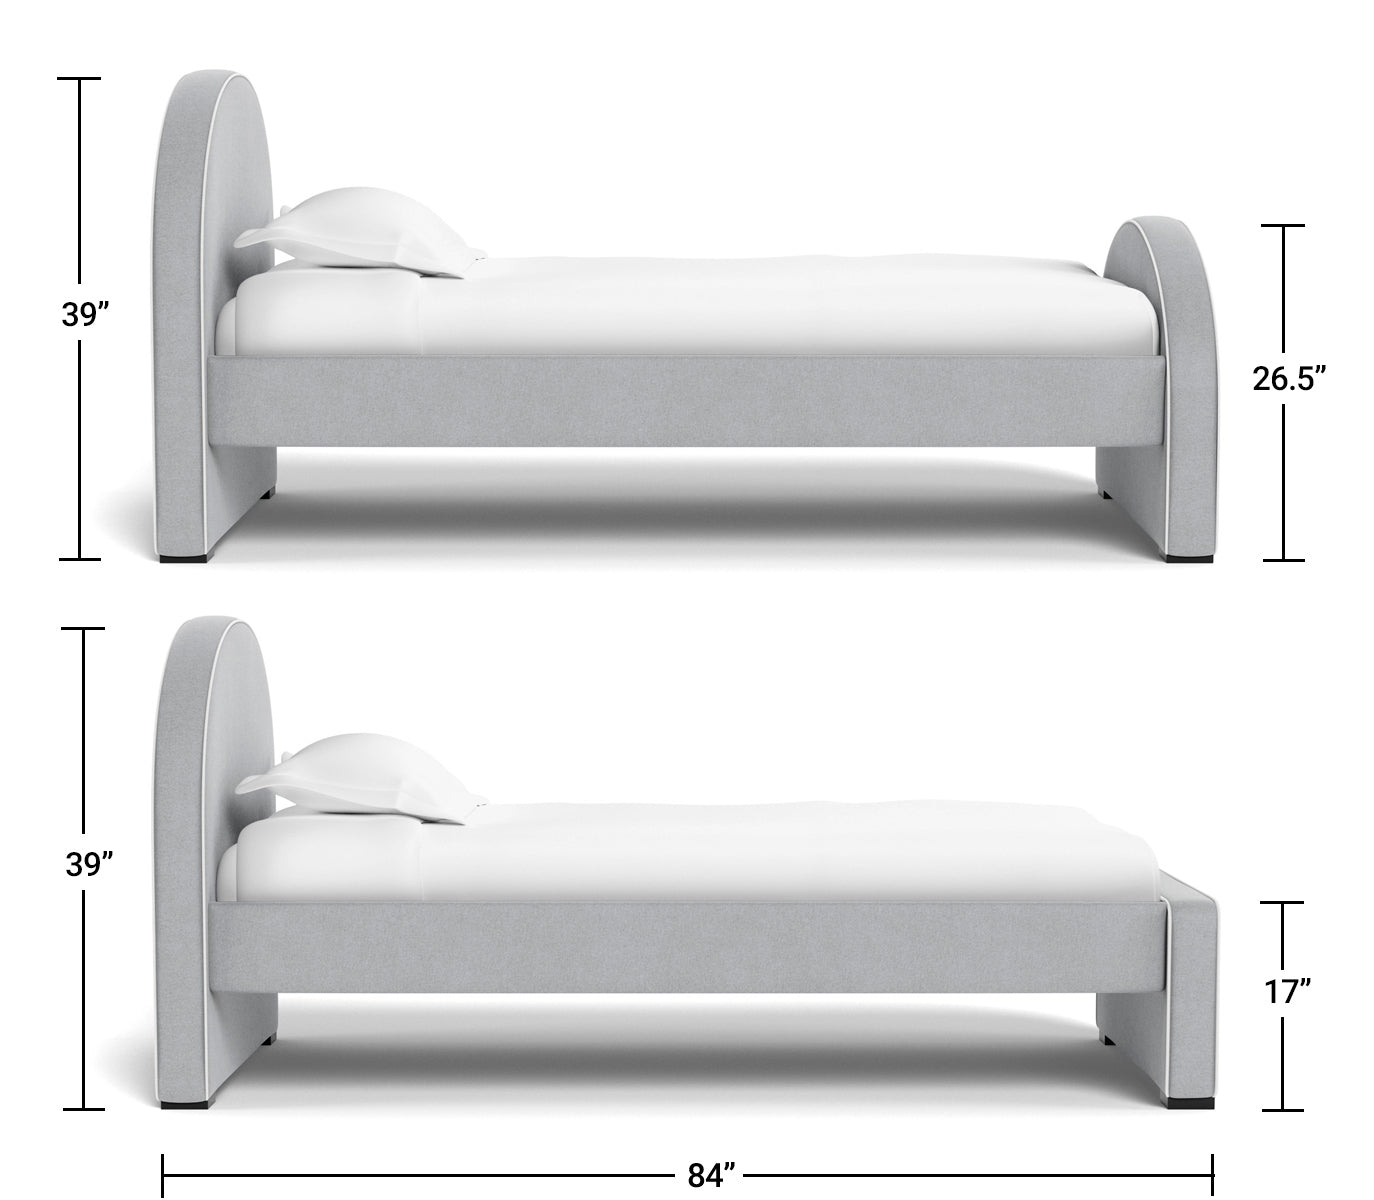 Luna Twin Bed Dimensions side view